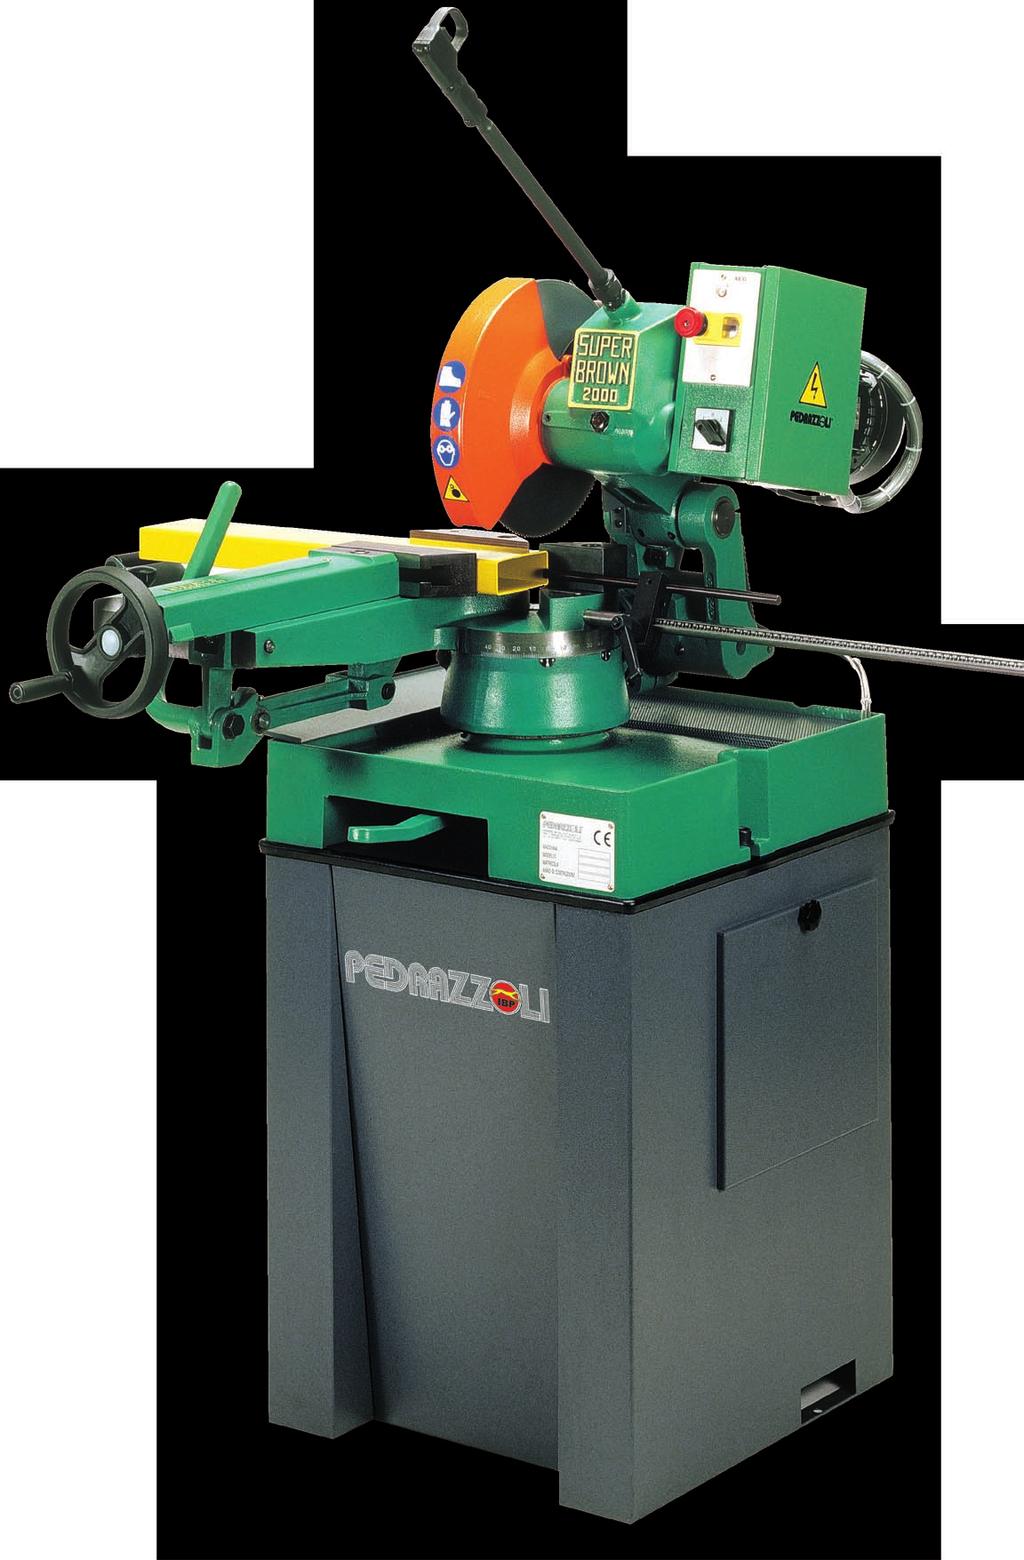 SUPER BROWN 2000 MRM MANUAL CIRCULAR SAW SUPER BROWN 2000 MRM Version with Manual Vice SUPER BROWN 2000 MRP Version with Pneumatic Vice with infinitely variable blade speed for all types of metals